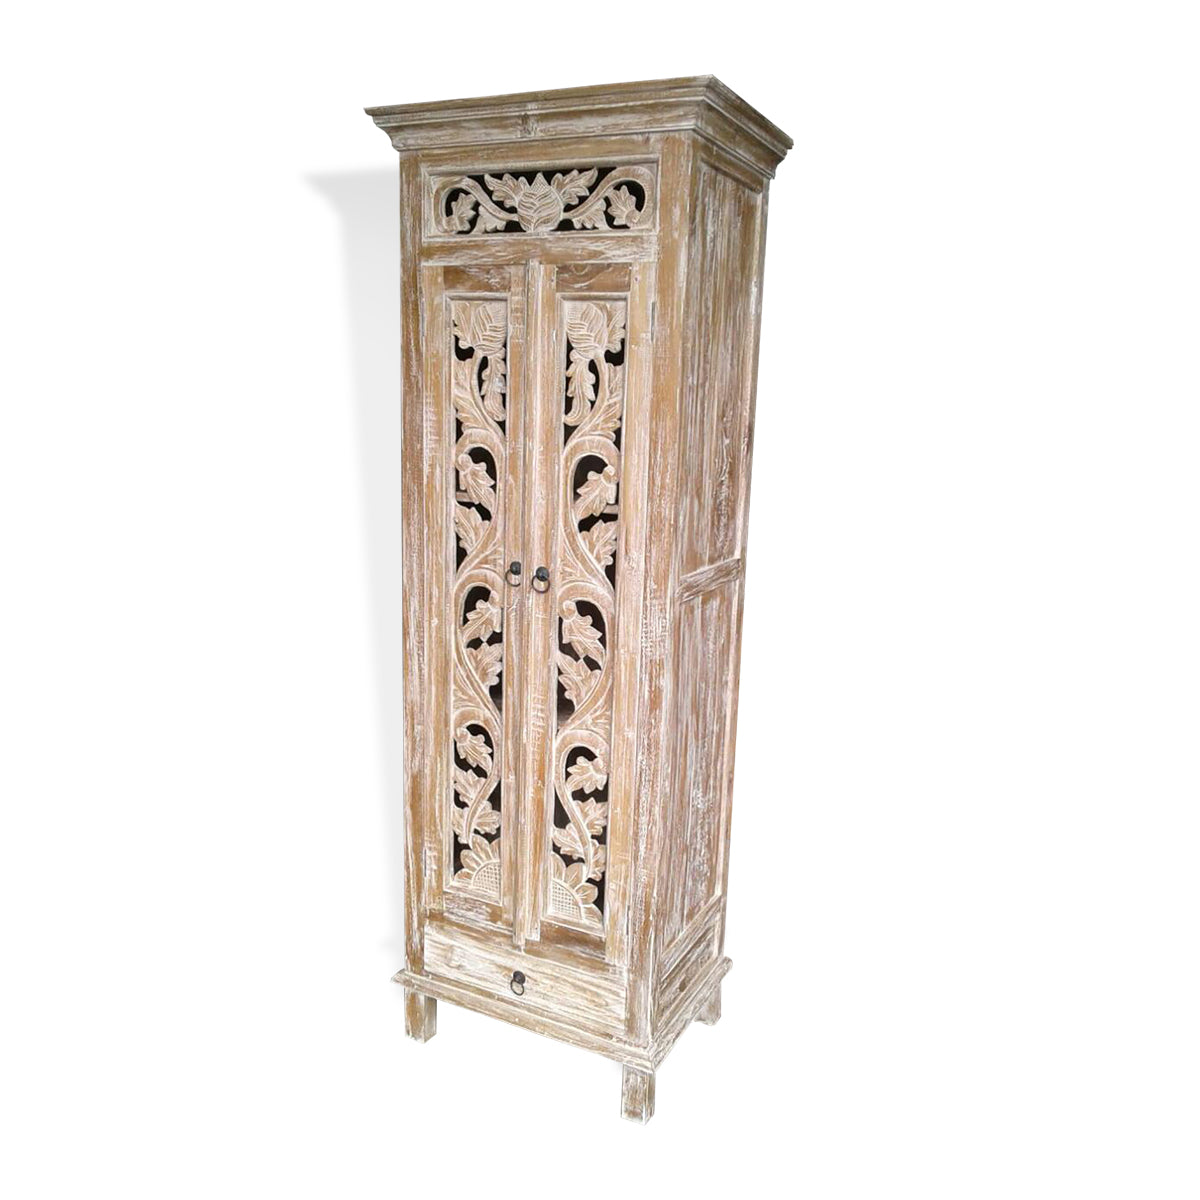 LAC056 NATURAL RECYCLED TEAK WOOD TWO DOORS AND ONE DRAWER CARVED CABINET